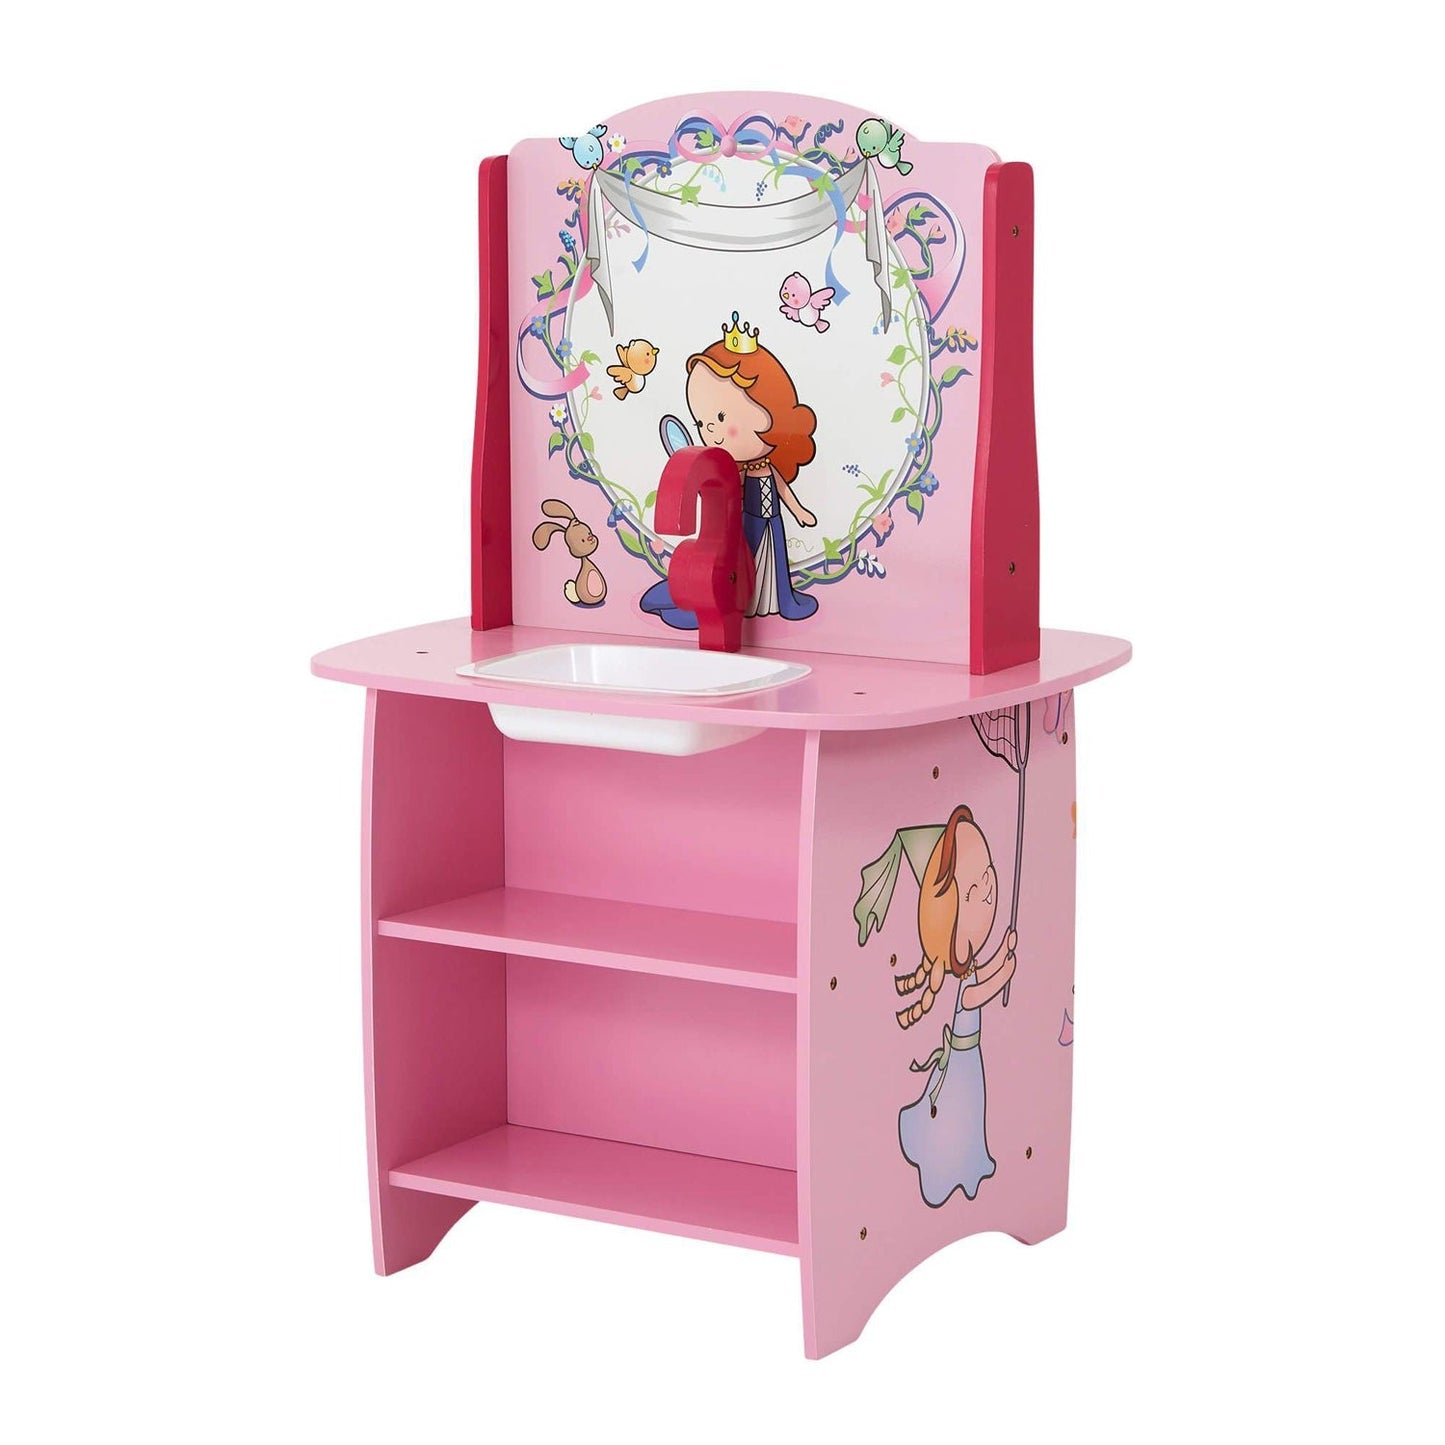 Princess Wooden Kitchen by Liberty House Toys